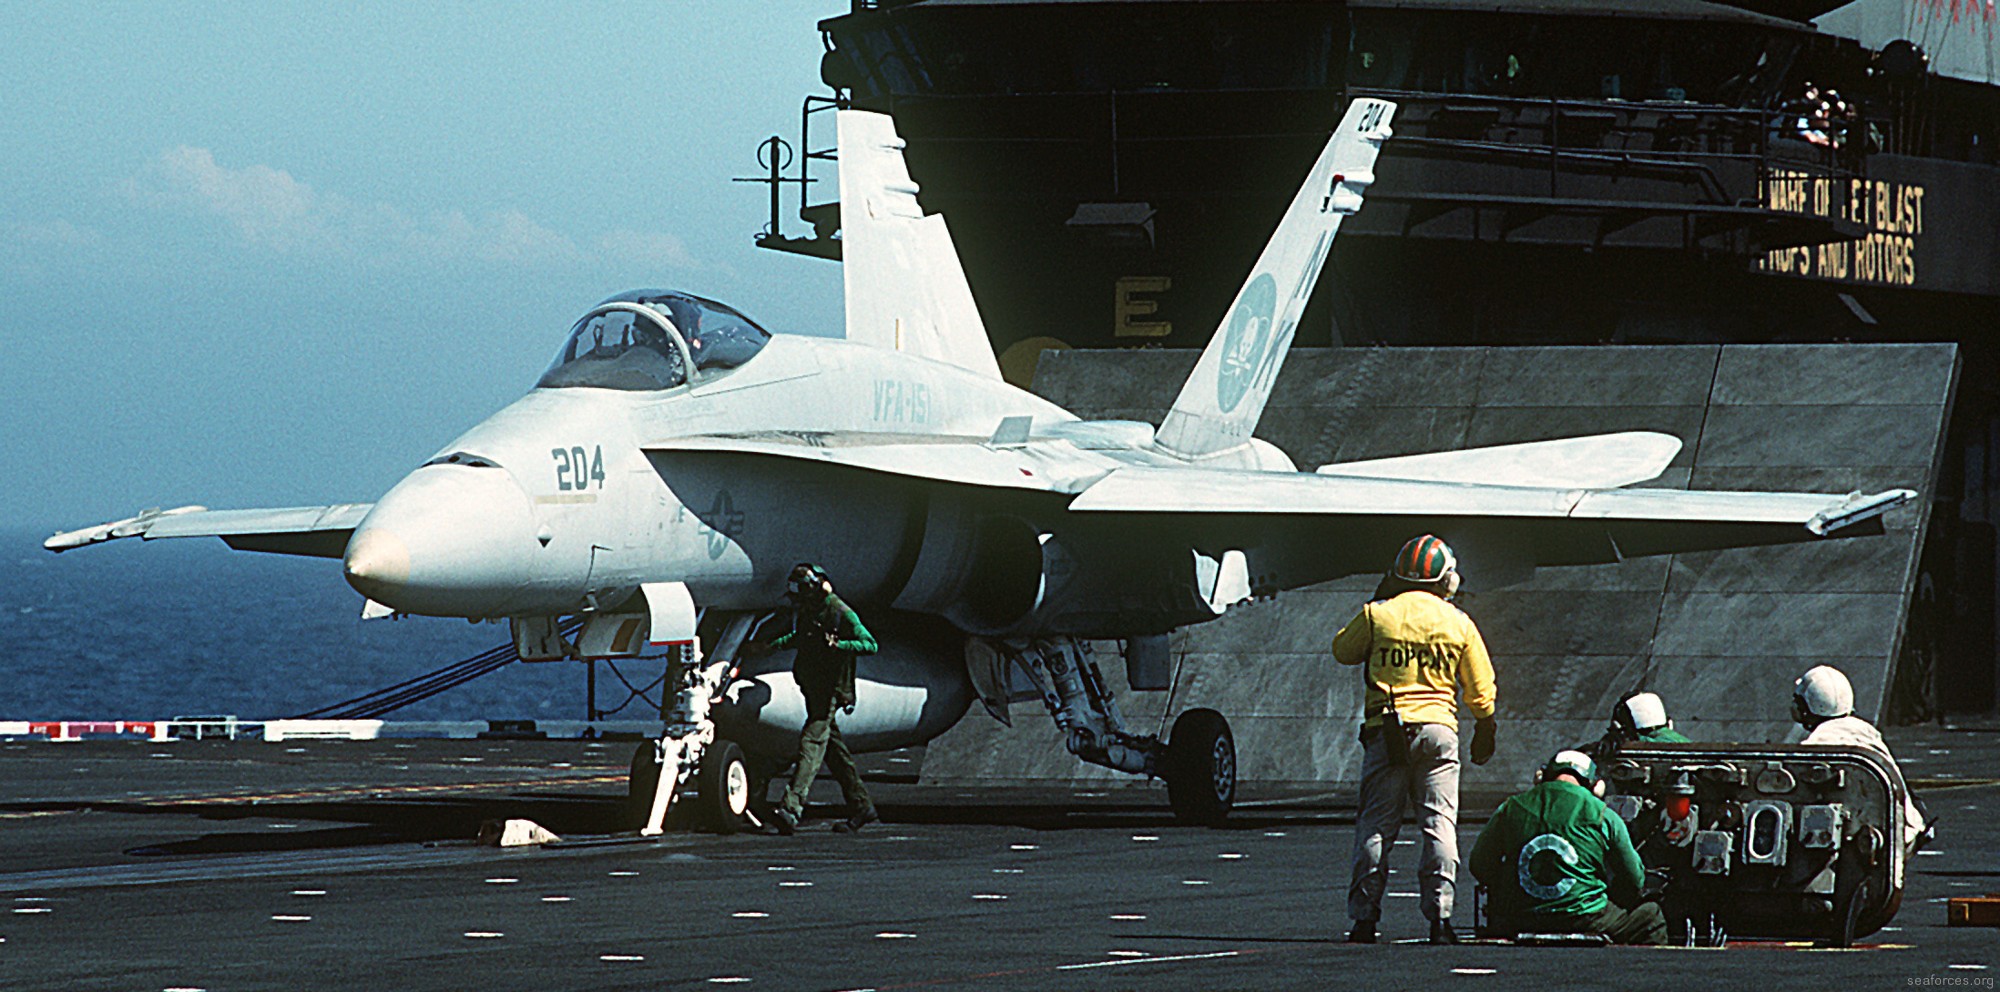 vfa-151 vigilantes strike fighter squadron navy f/a-18a hornet carrier air wing cvw-14 uss midway cv-41 80